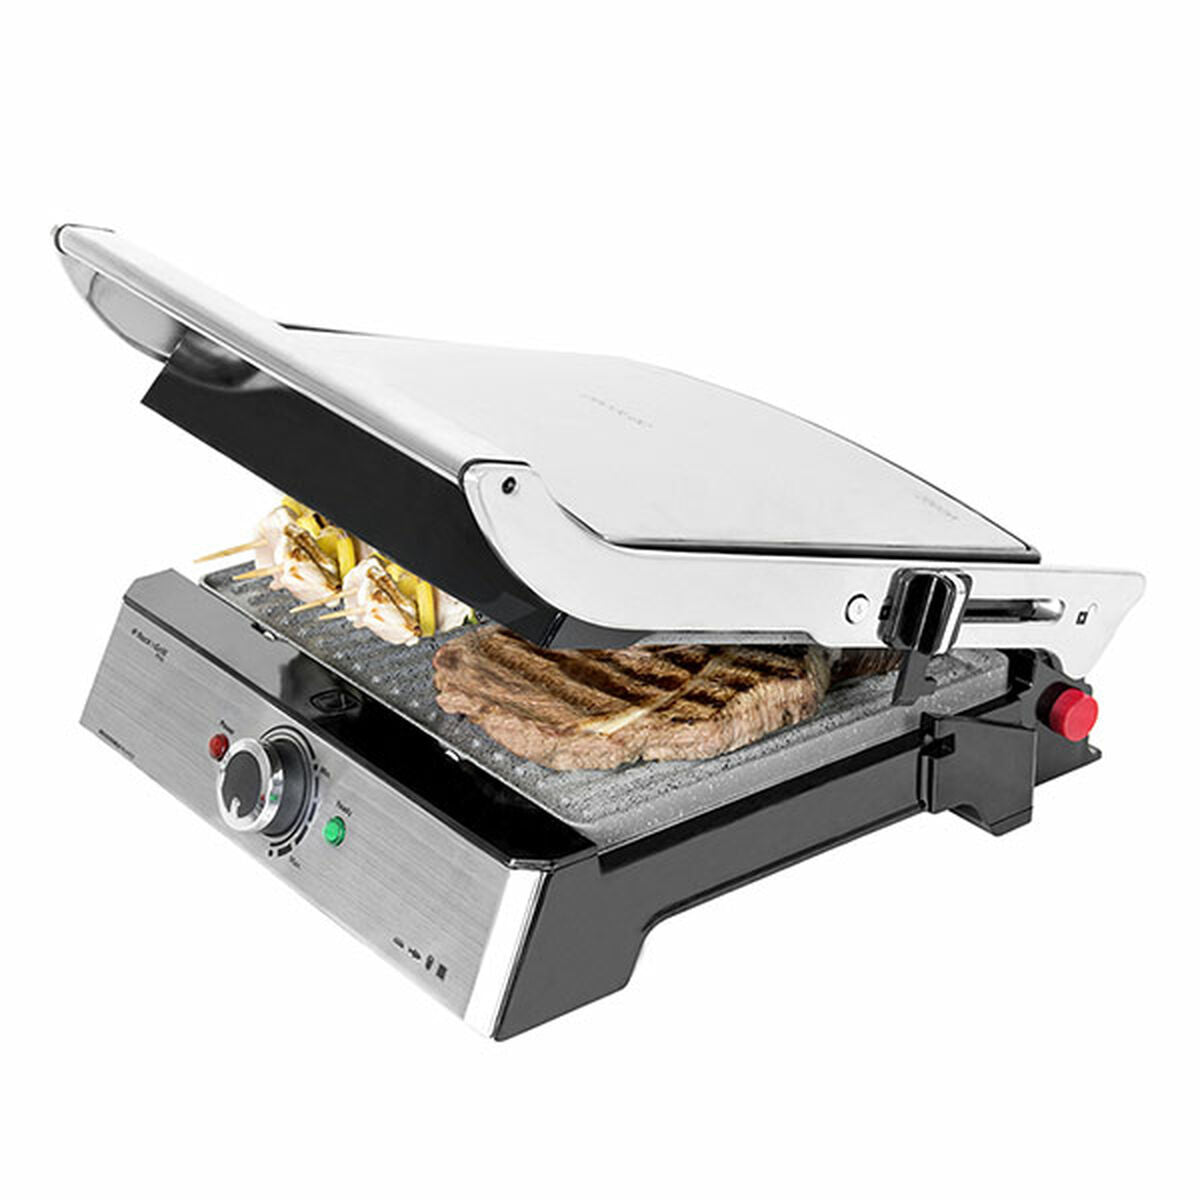 Grill Cecotec Rock'nGrill Pro Silver 2000 W